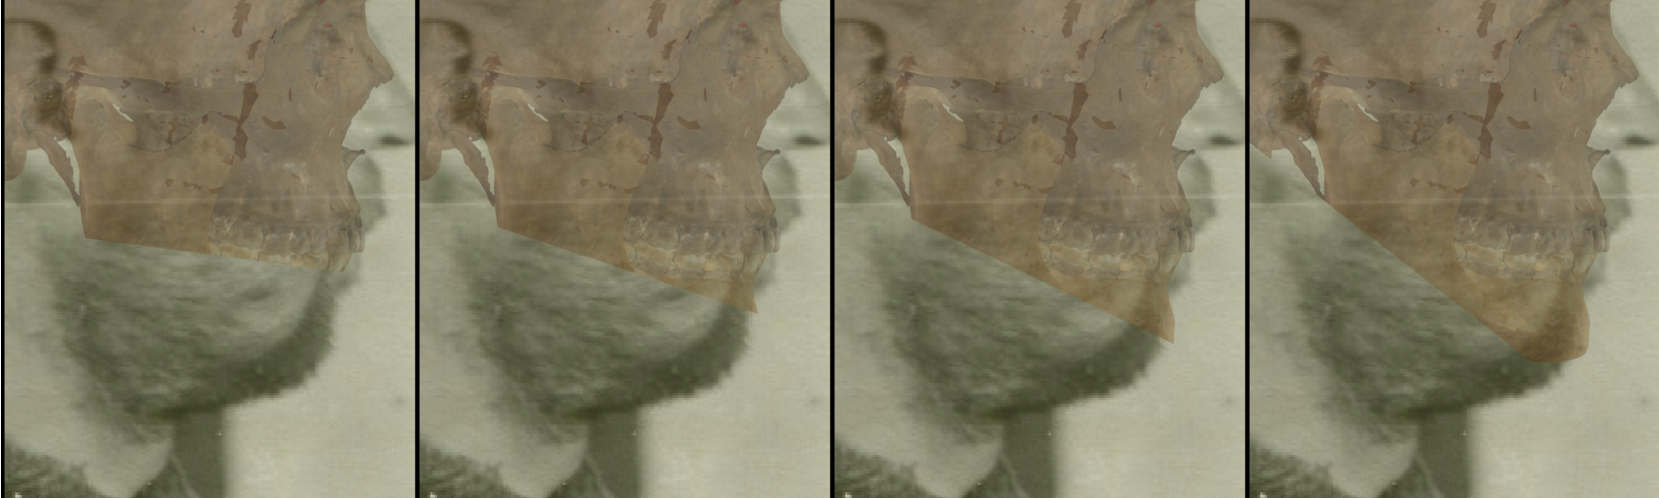 Example of a negative match in which the chin outline is evaluated with the transparency and wipe tools, showing that the chin outline is not consistent with the mental outline. The wipe tool has been used to show a gradient from right to left (anatomical) of the mental outline (skull) over the chin outline. In this case the mental outline protrudes from the chin outline on the face, showing an incompatible inconsistency